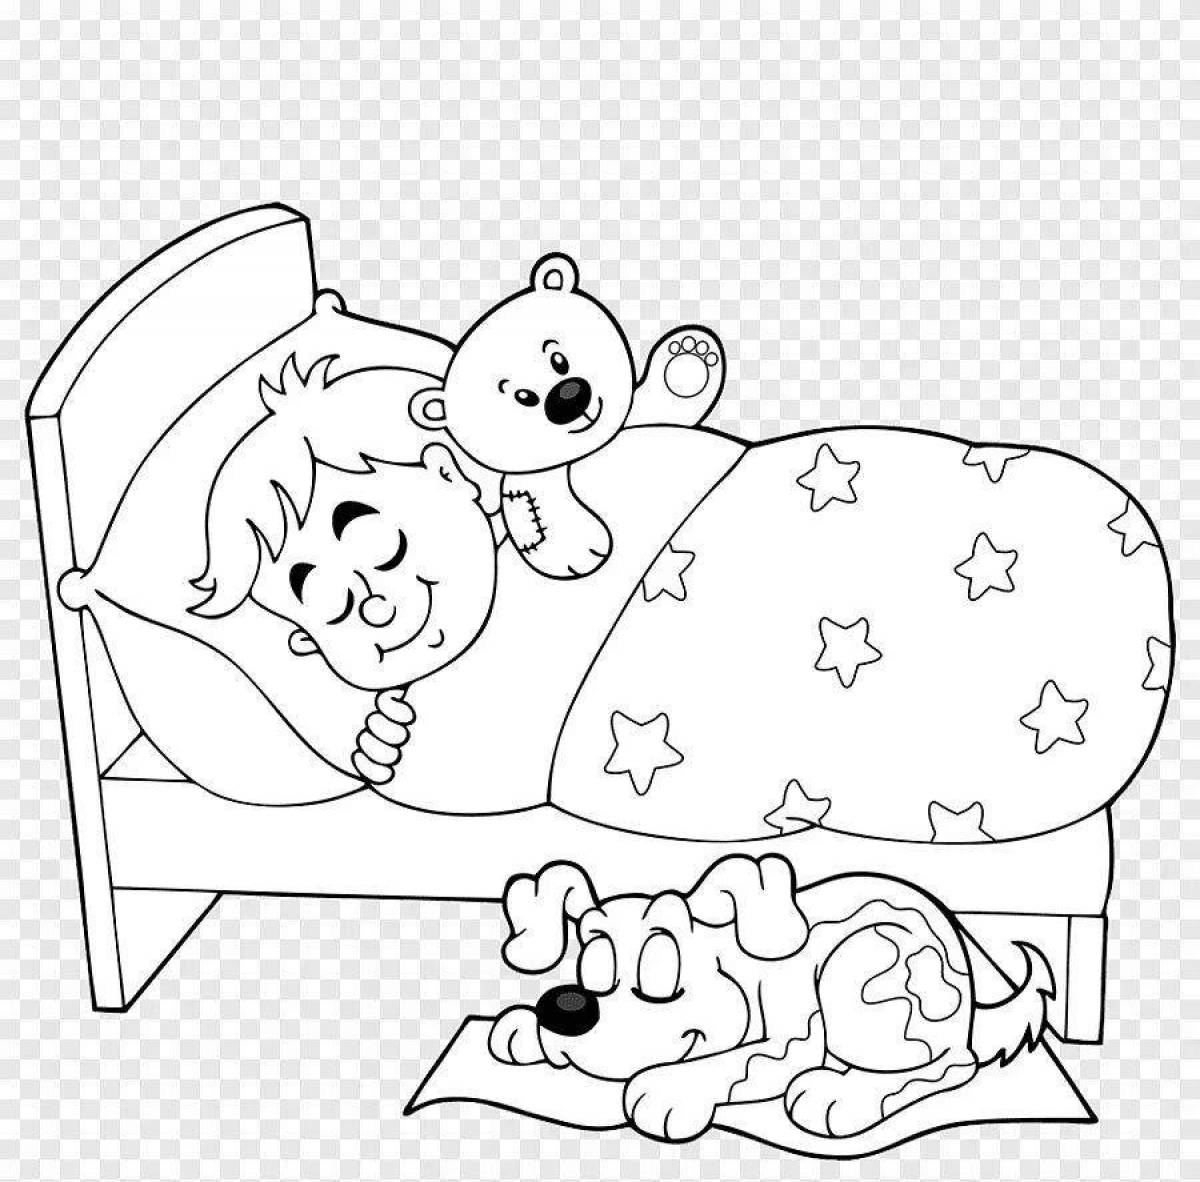 Sparkling crib coloring page